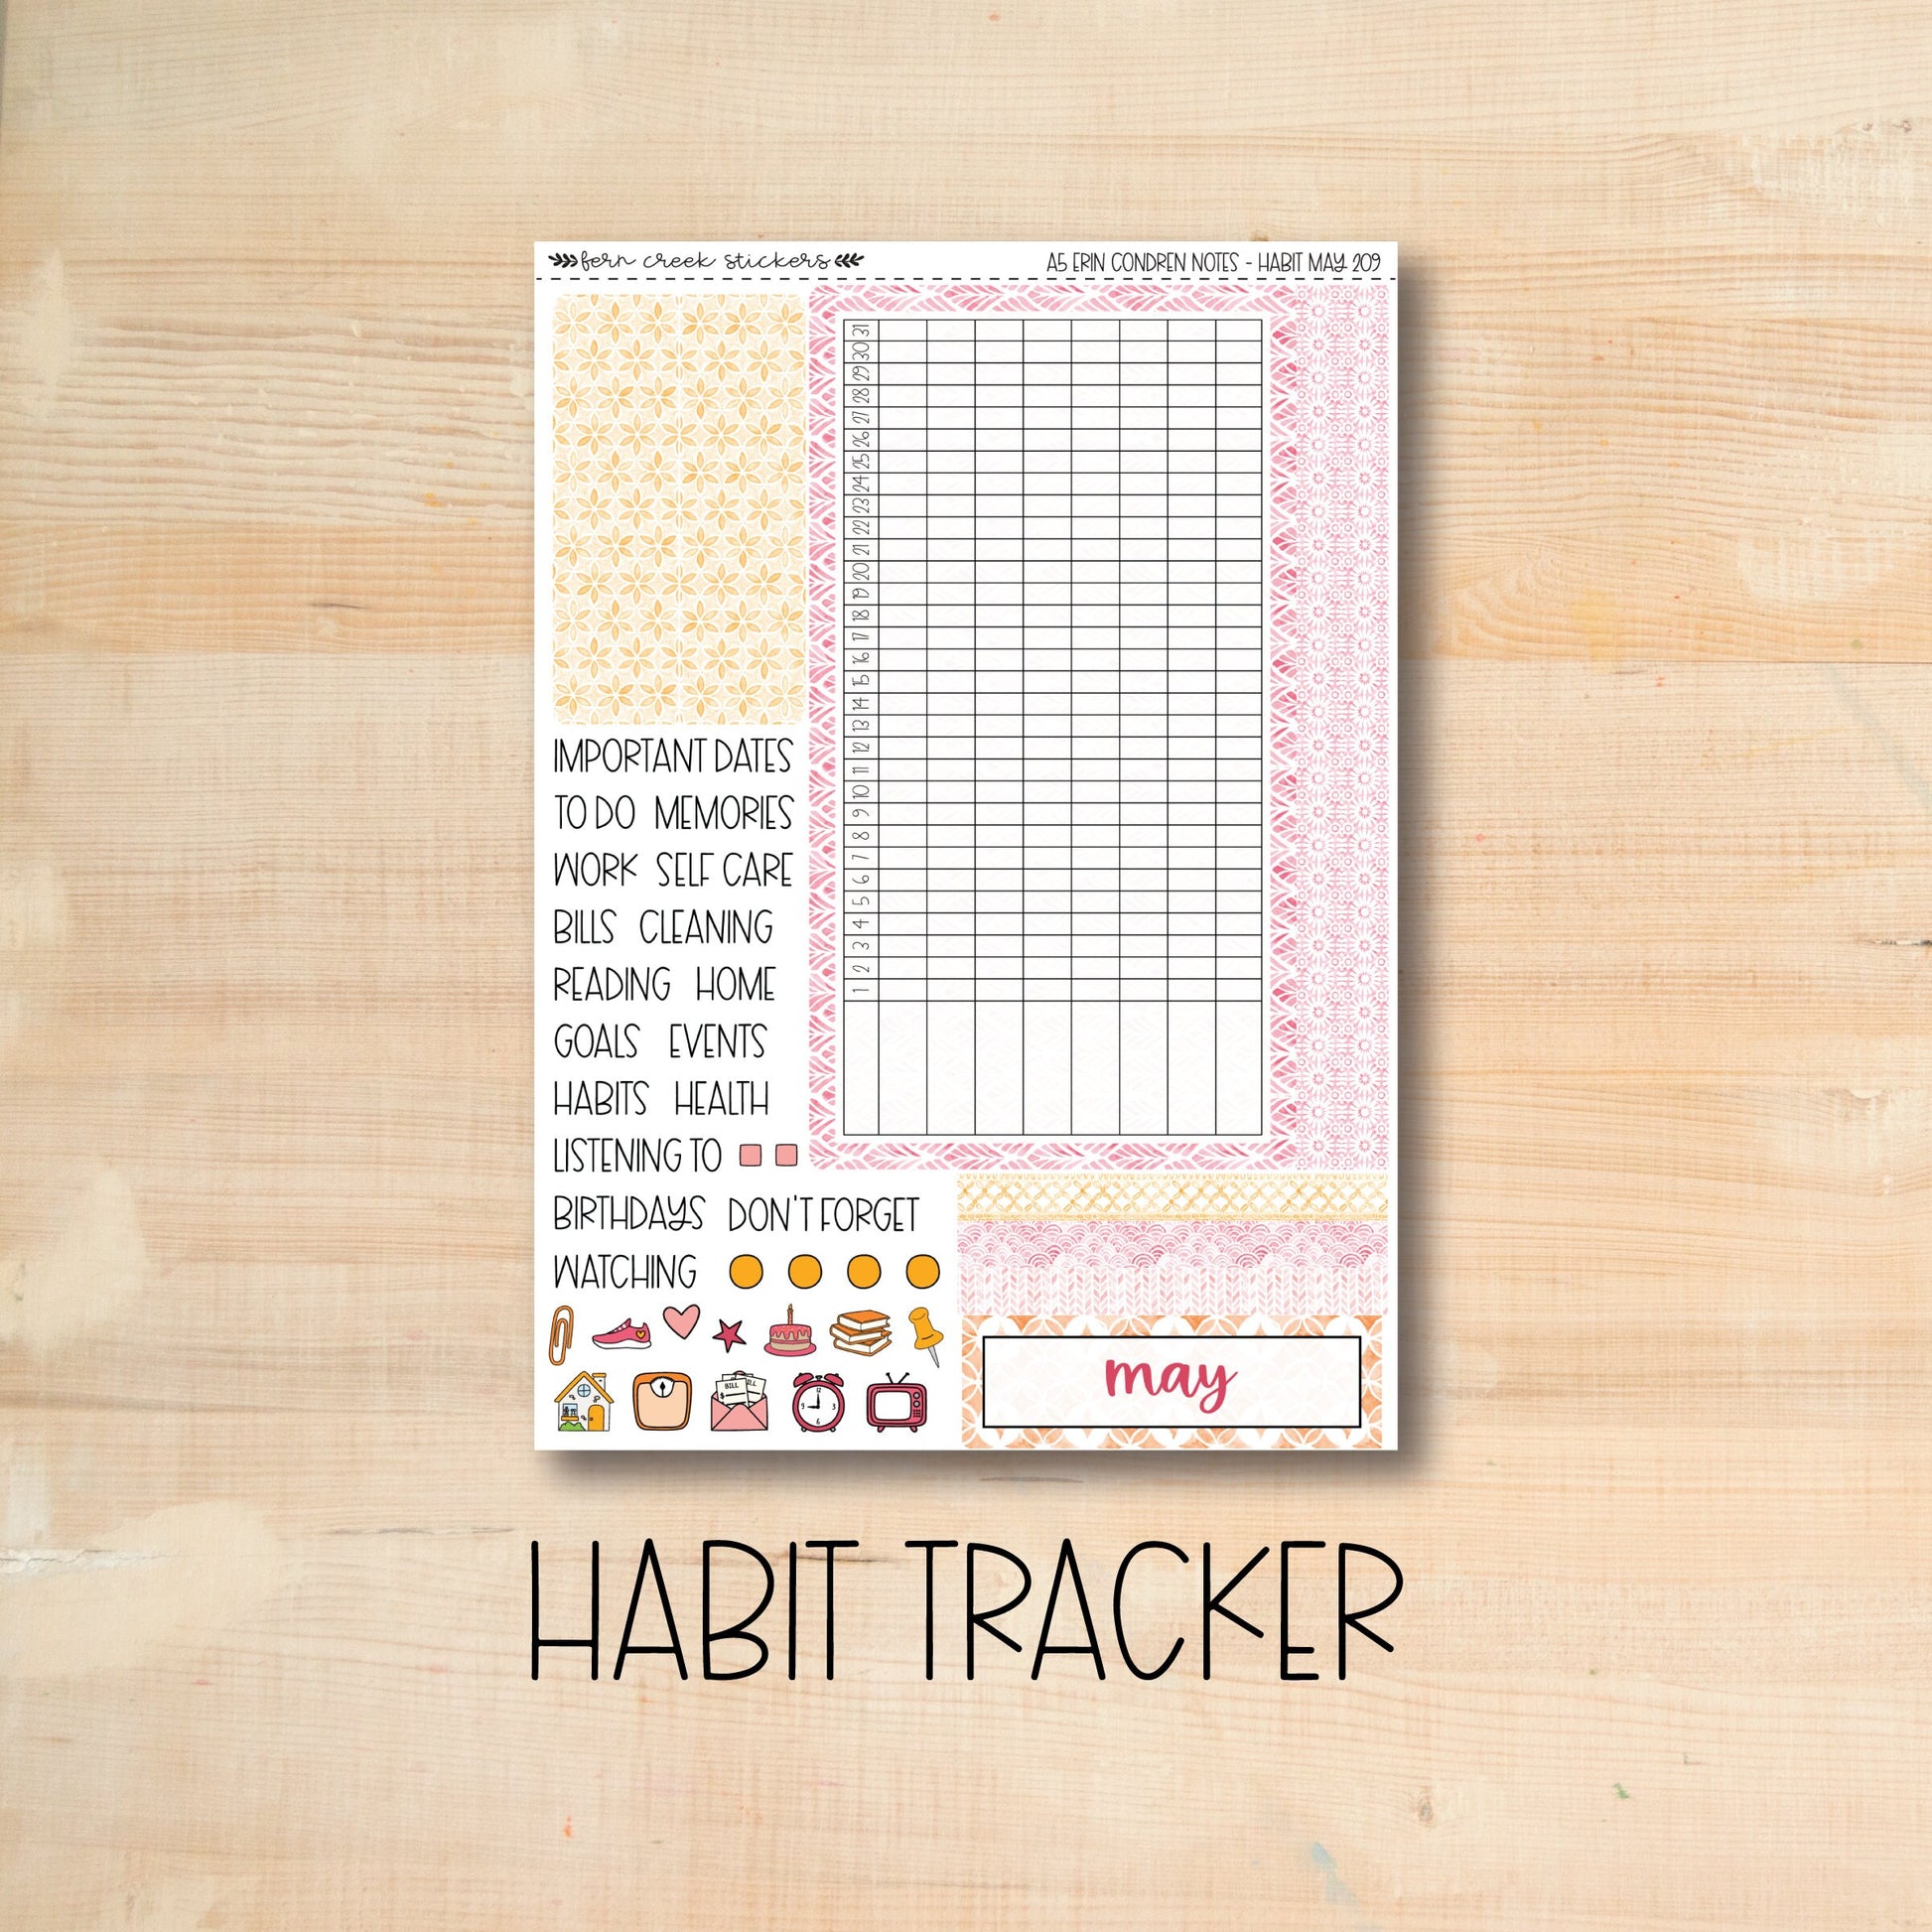 the habit tracker sticker is shown on a wooden surface